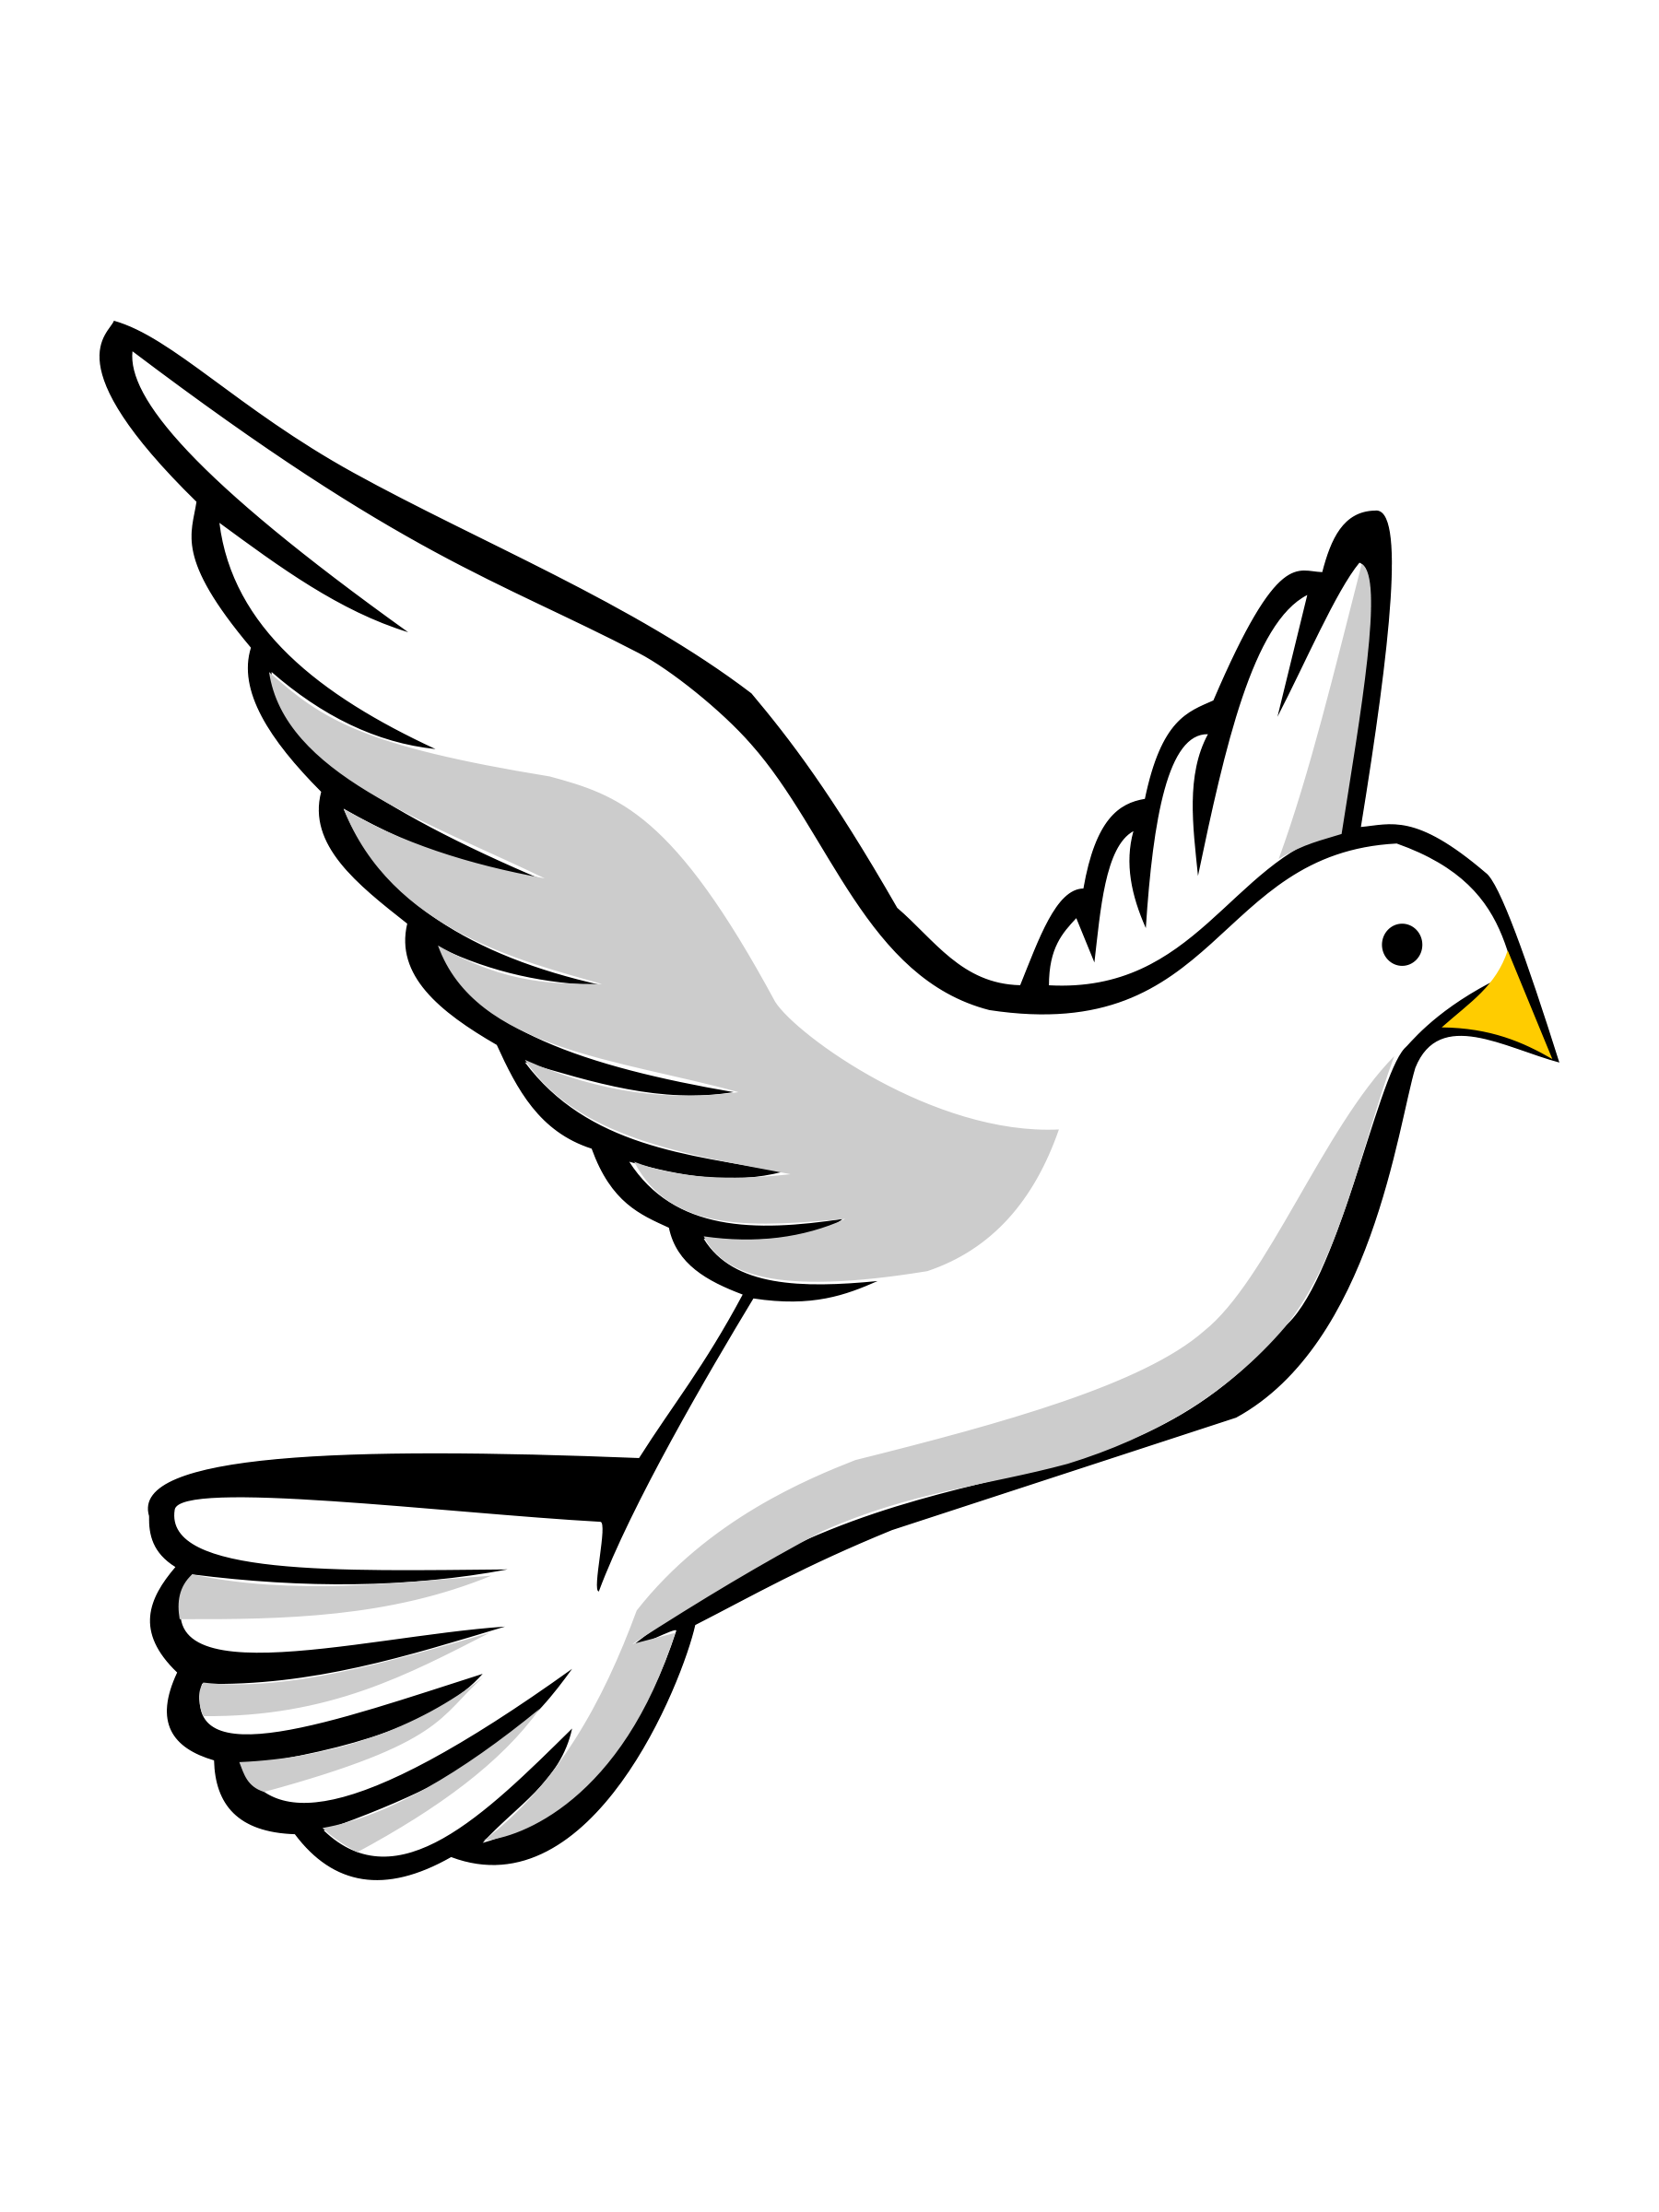 White Pigeon Download HQ PNG Image